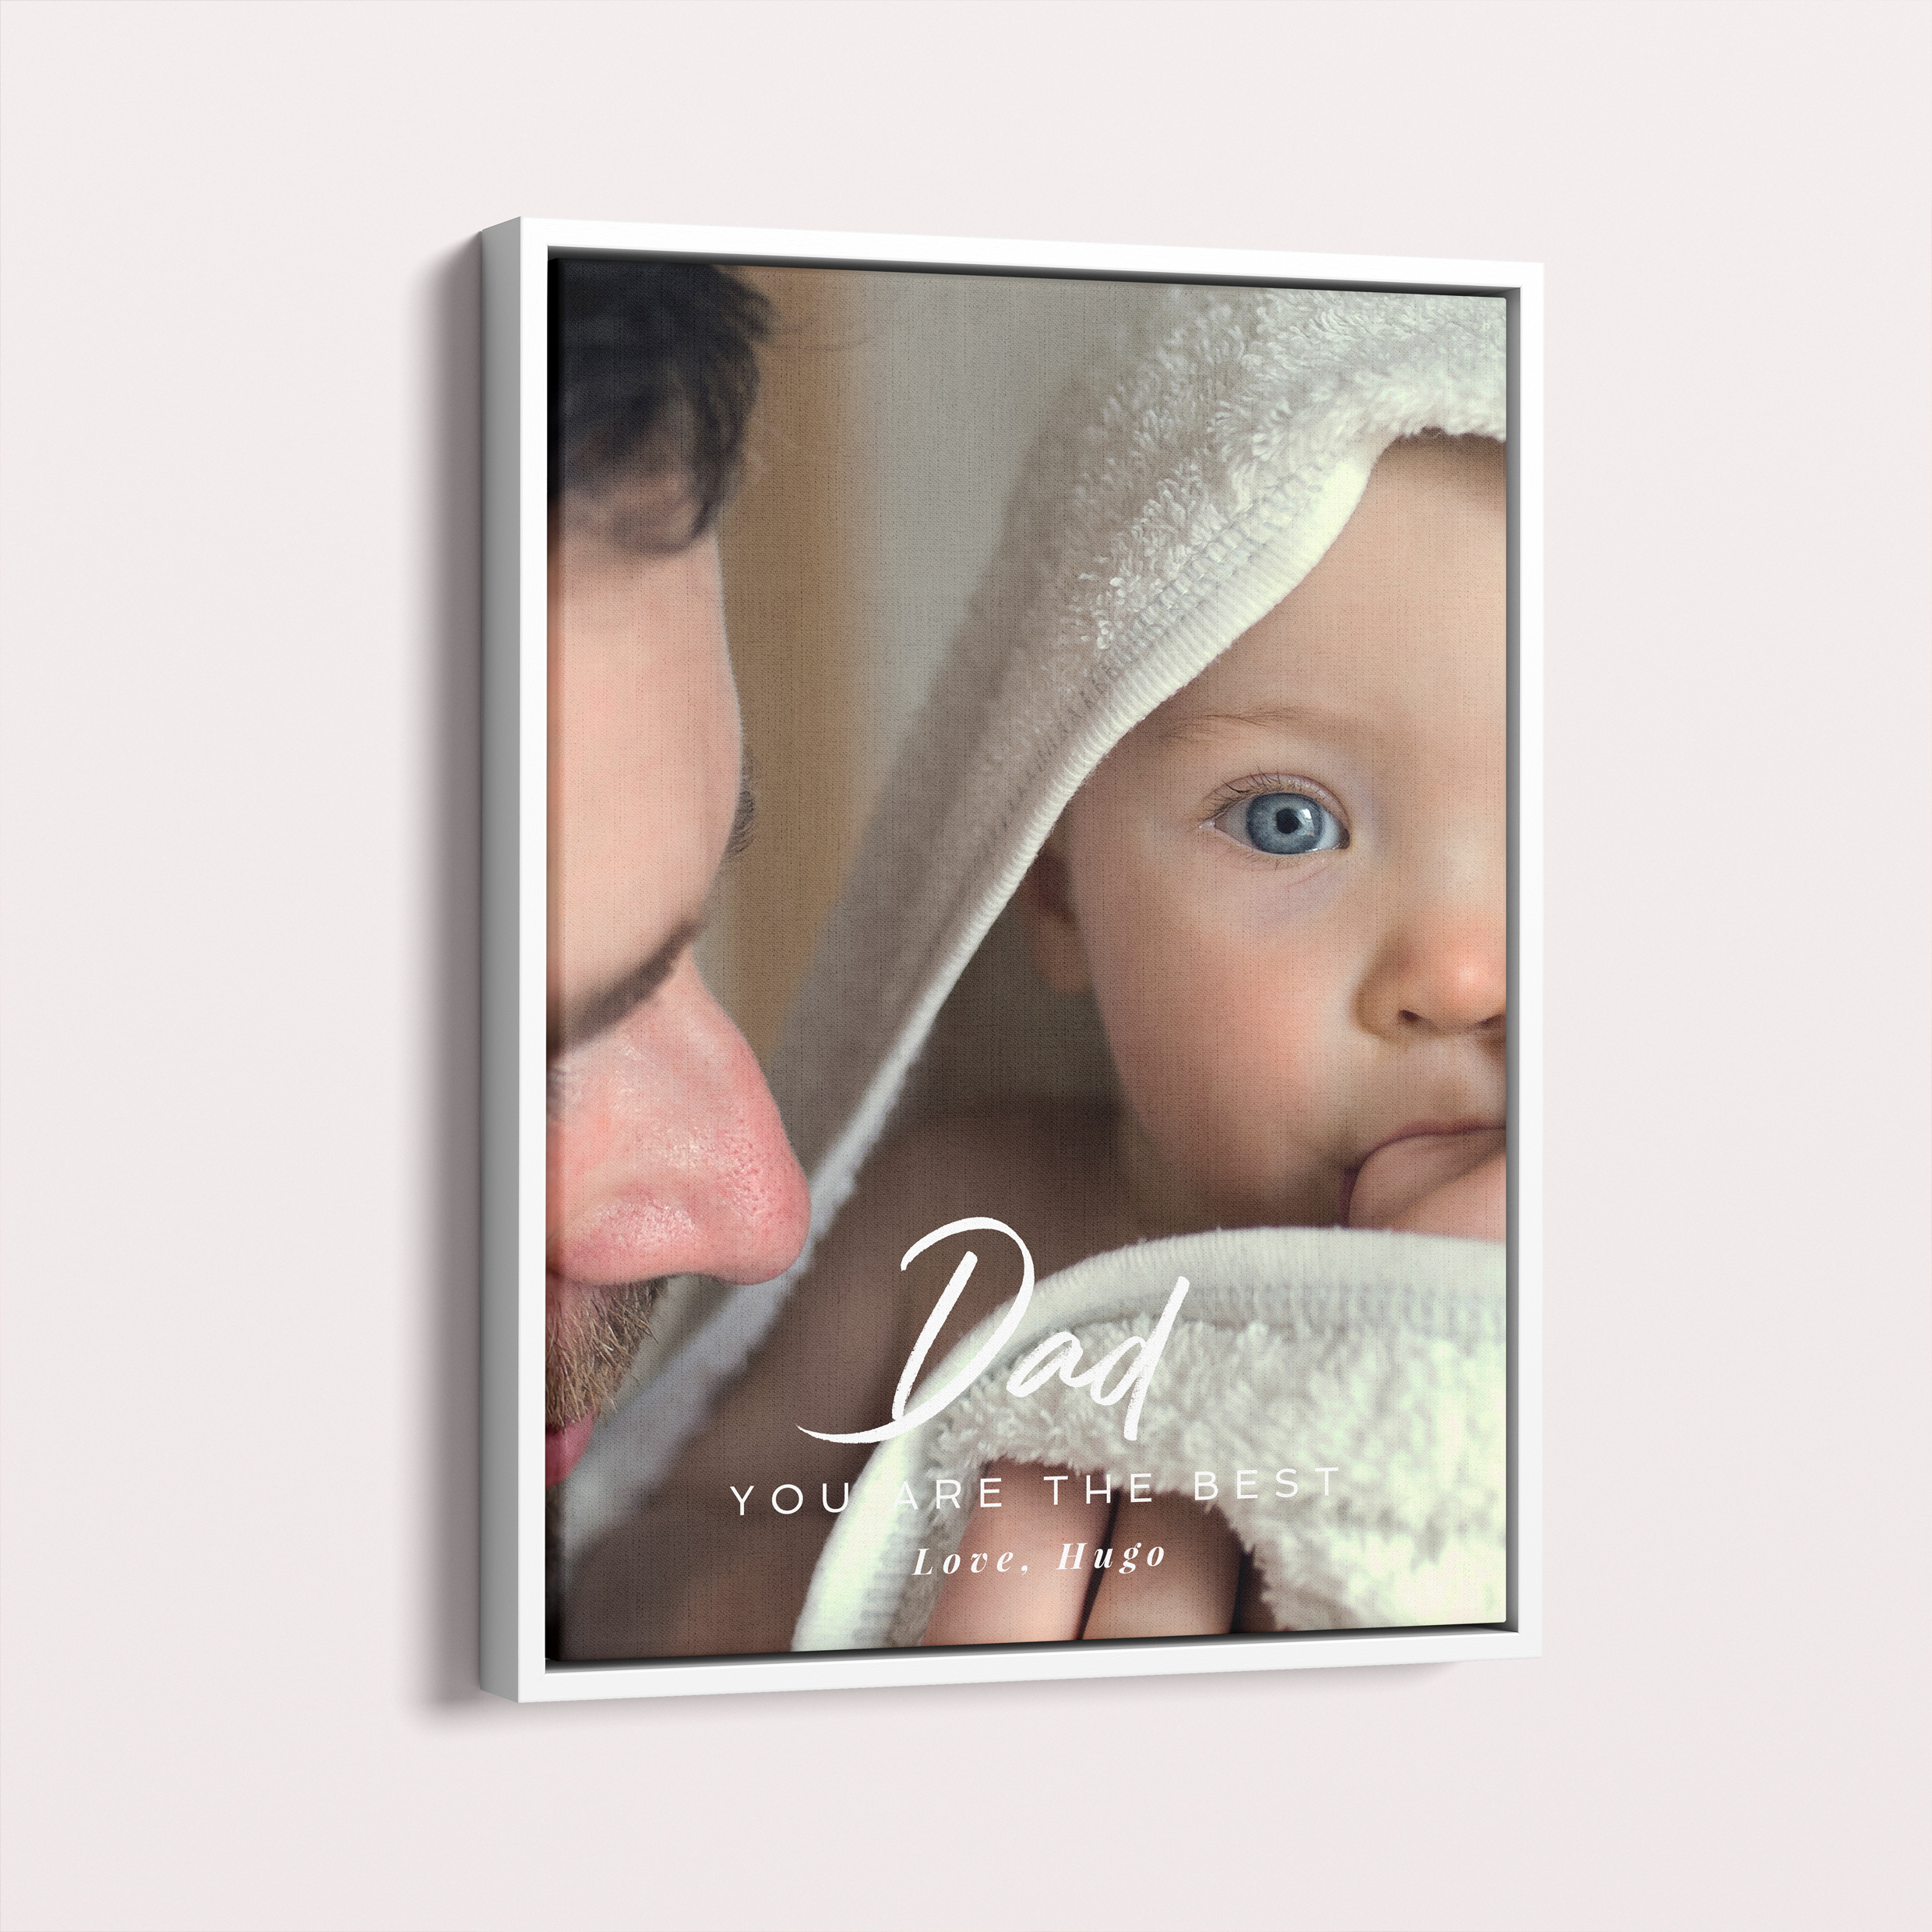 Personalised Papa's Presence Framed Canvas - Capture the essence of love and family